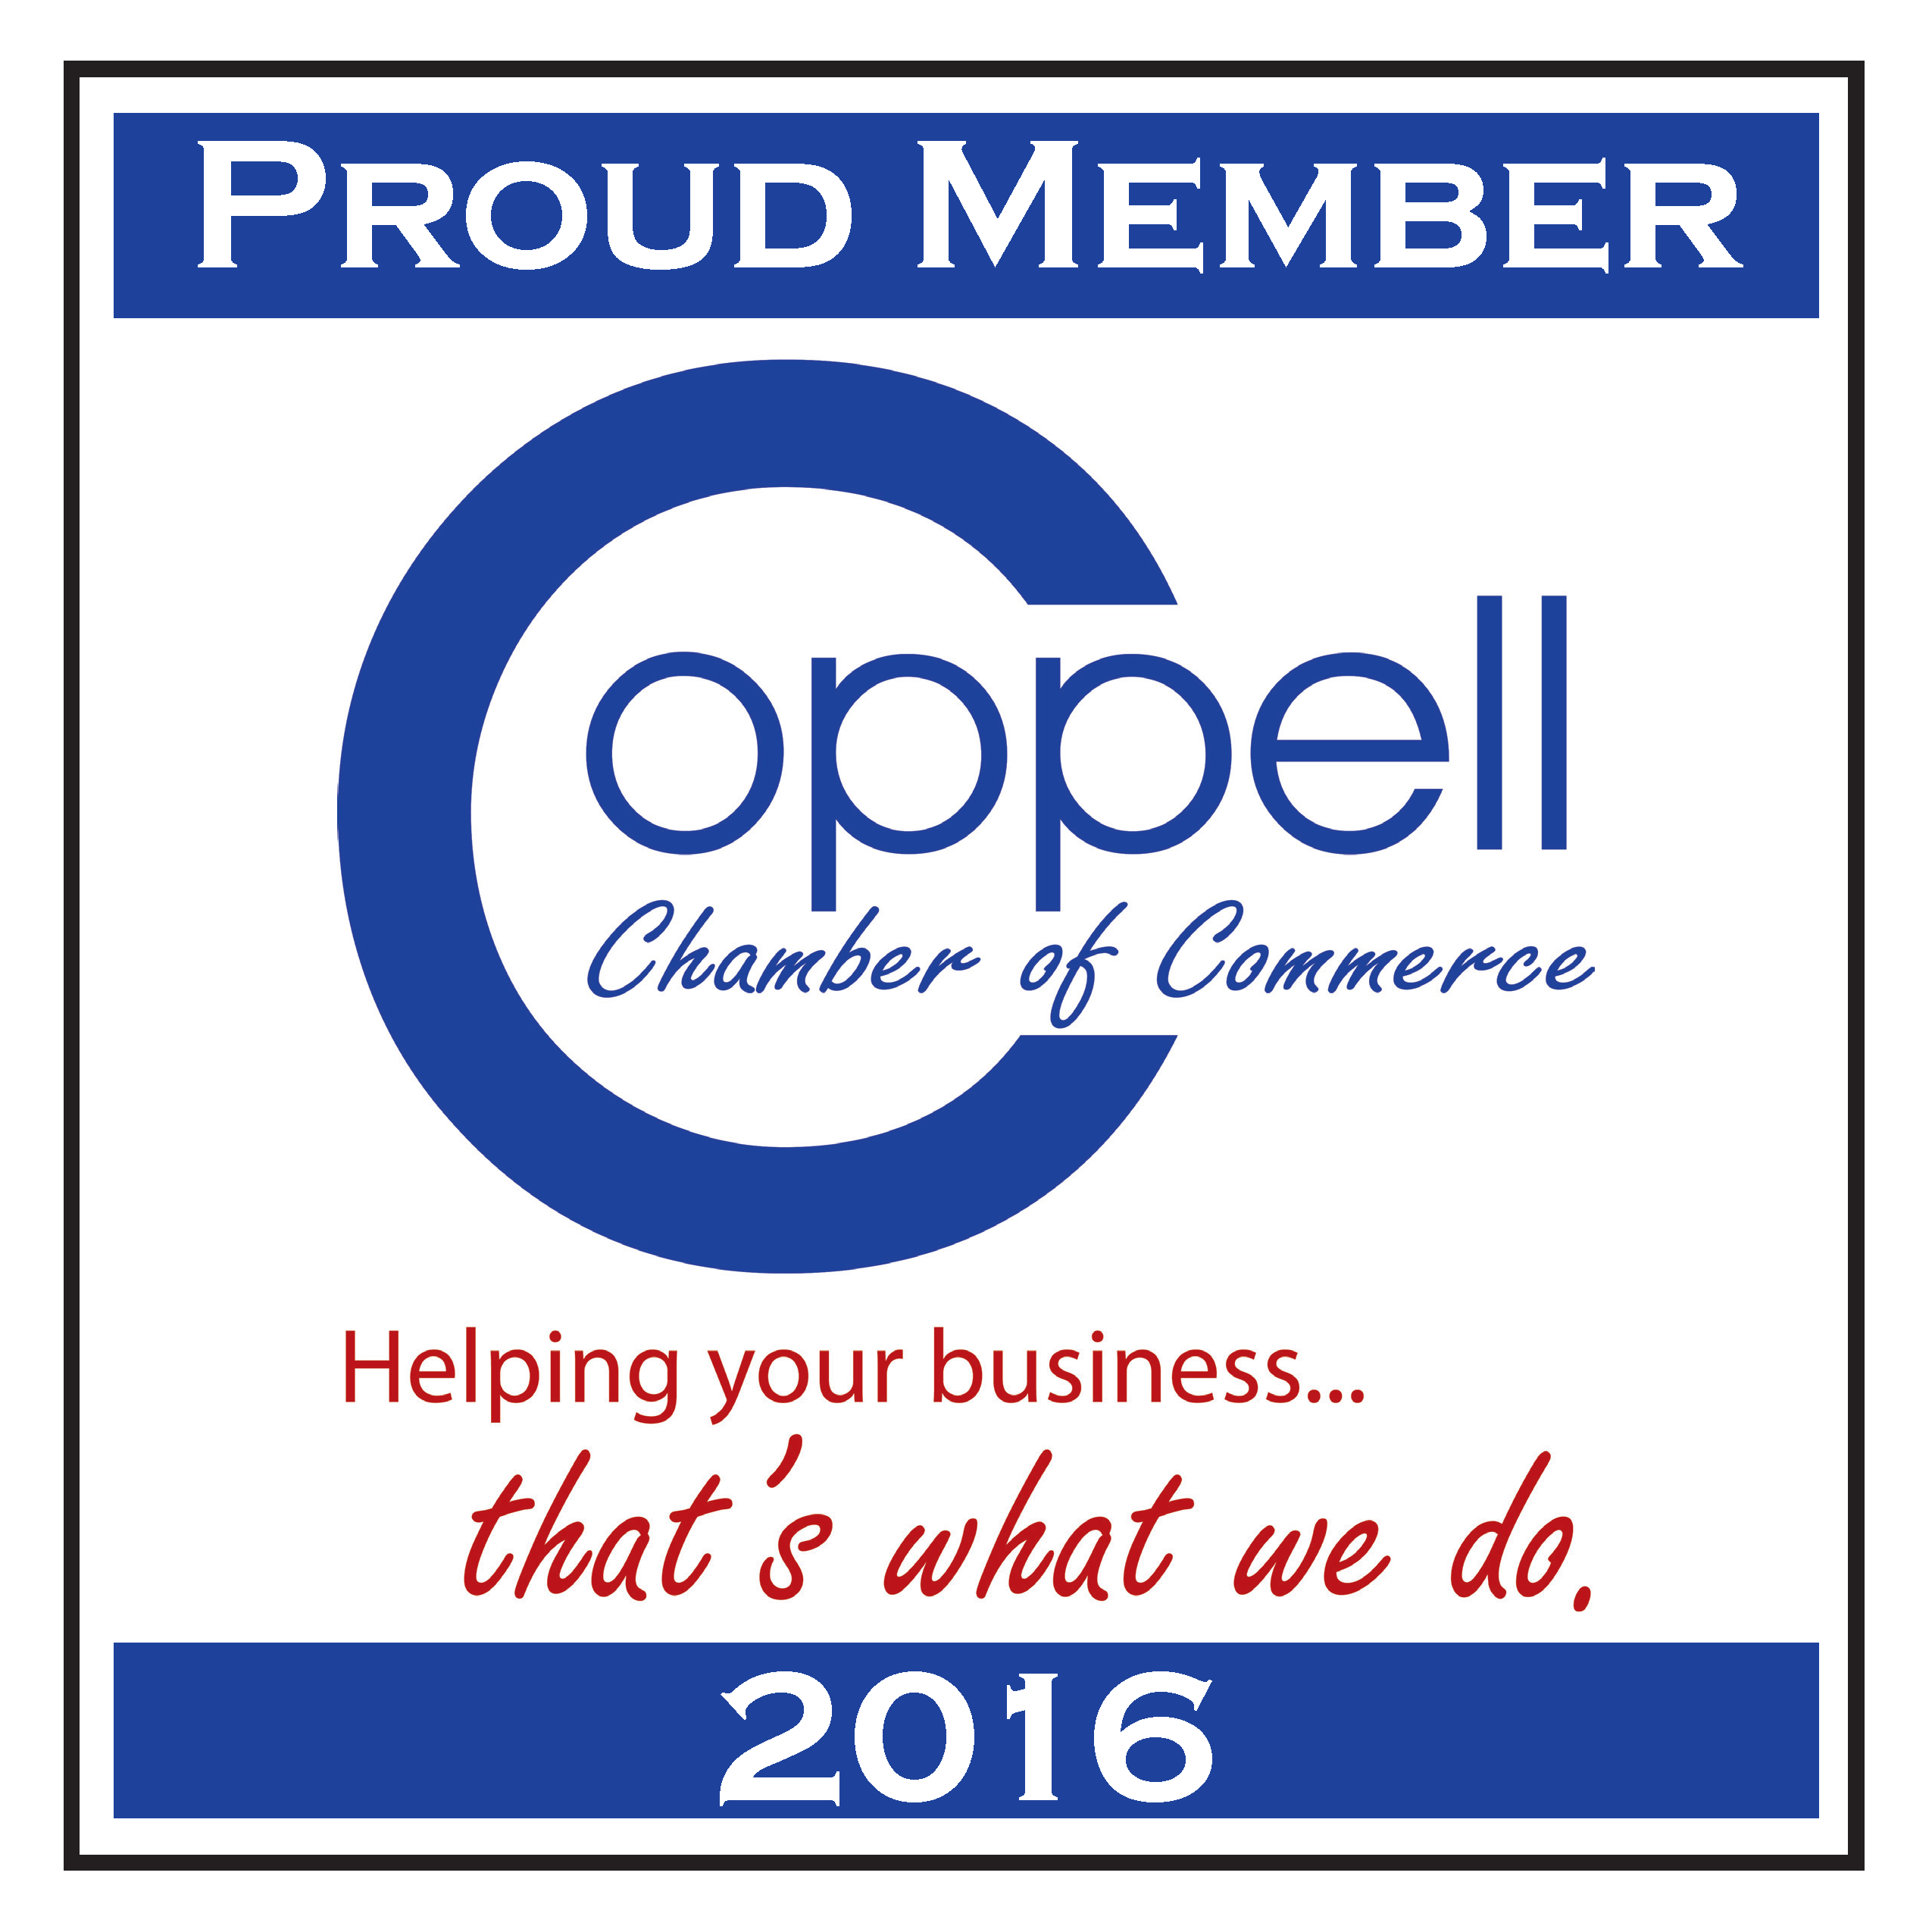 Coppell Chamber of Commerce